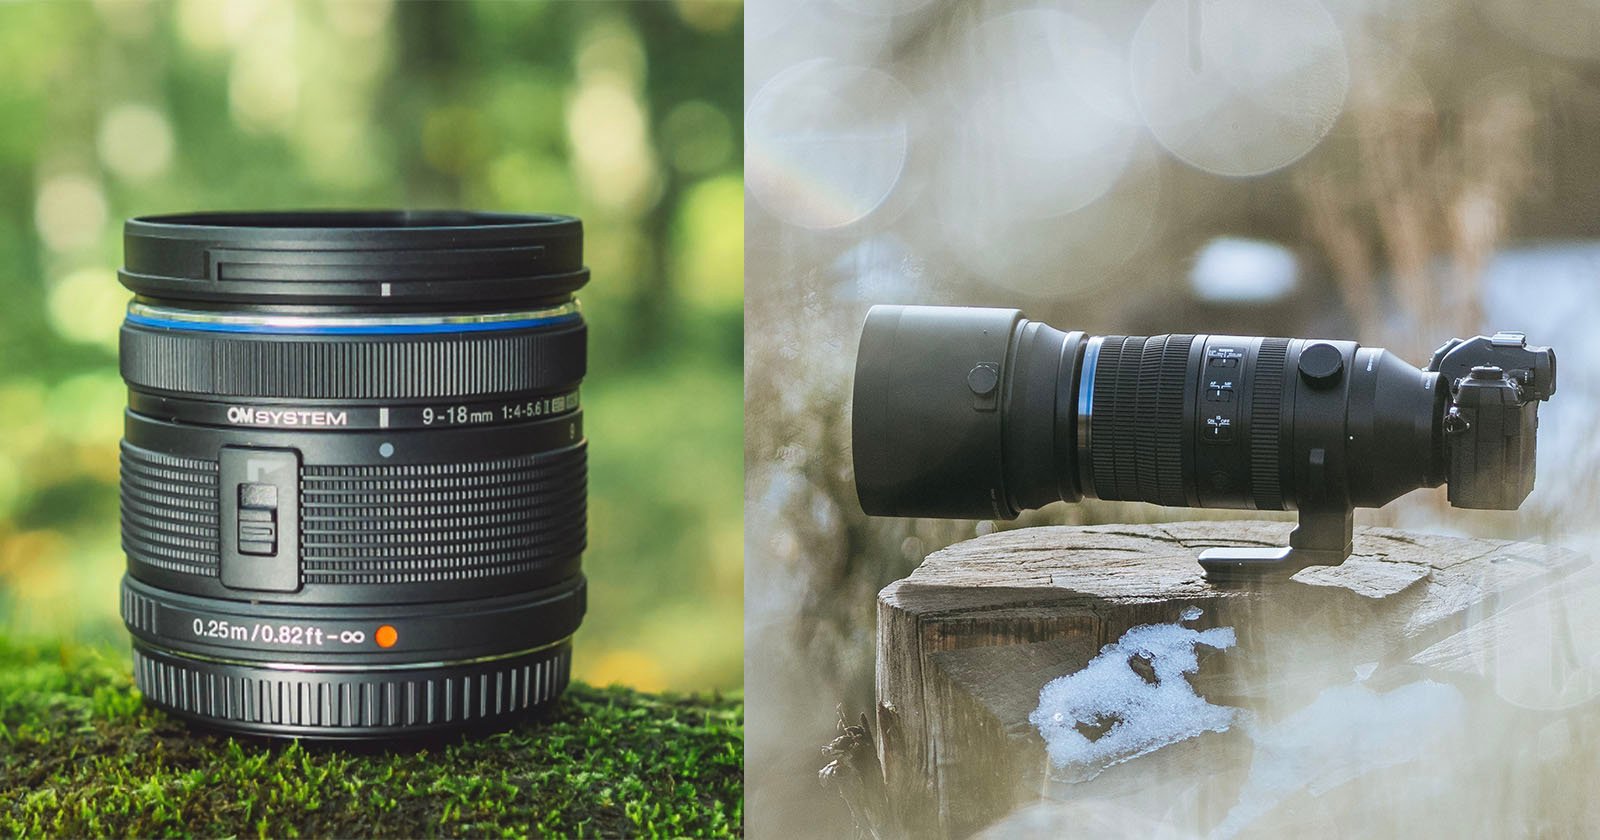 OM System Adds New 9-18mm f/4-5.6 II and 150-600mm f/5-6.3 IS Lenses